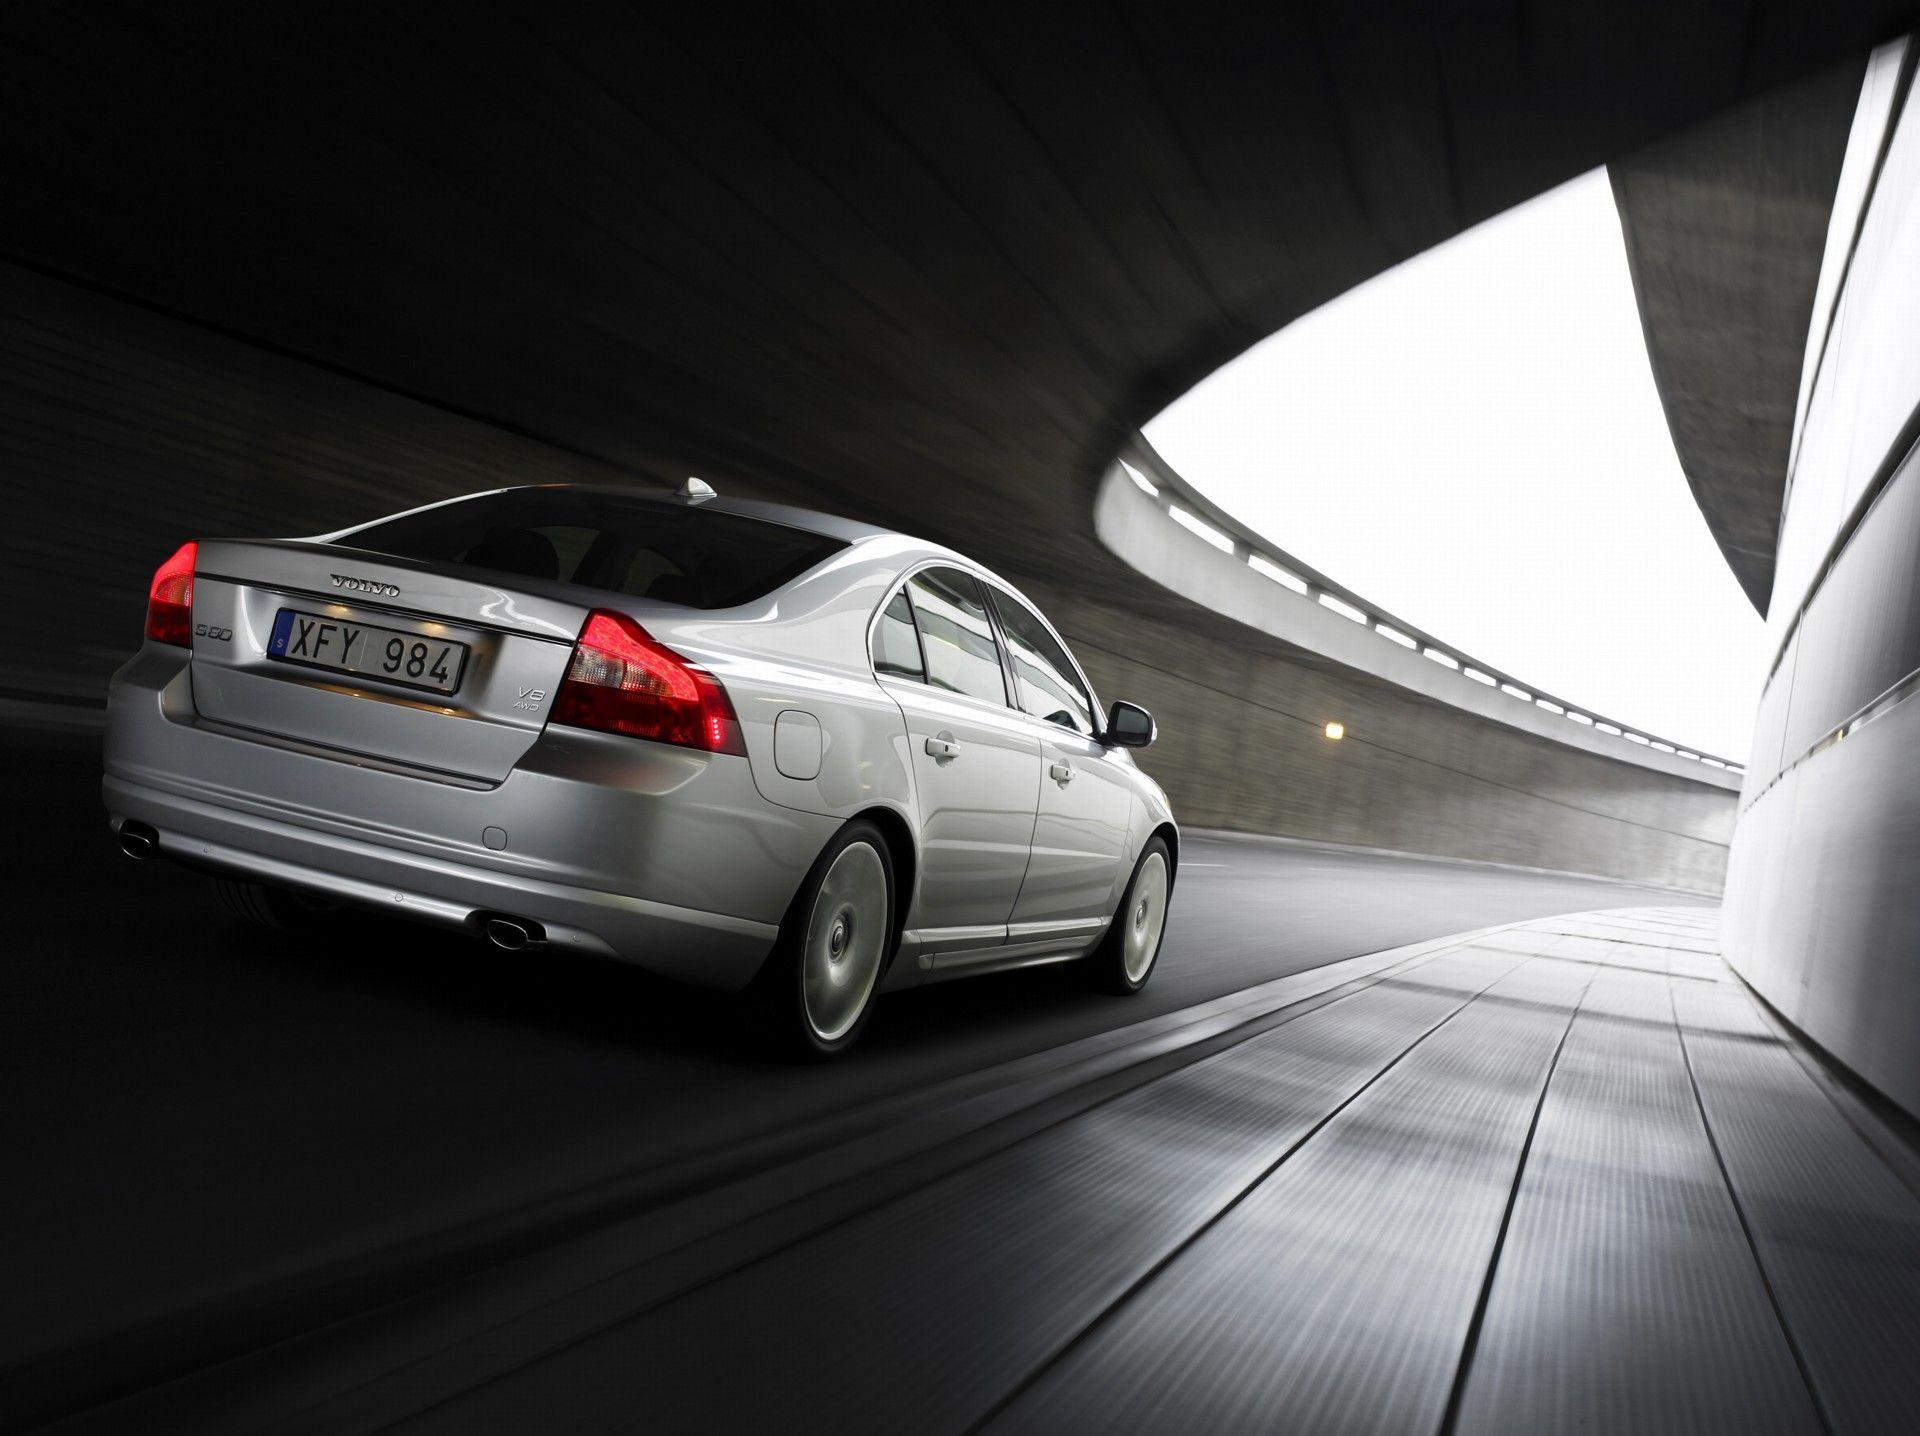 Volvo S80 Wallpapers Top Free Volvo S80 Backgrounds Wallpaperaccess